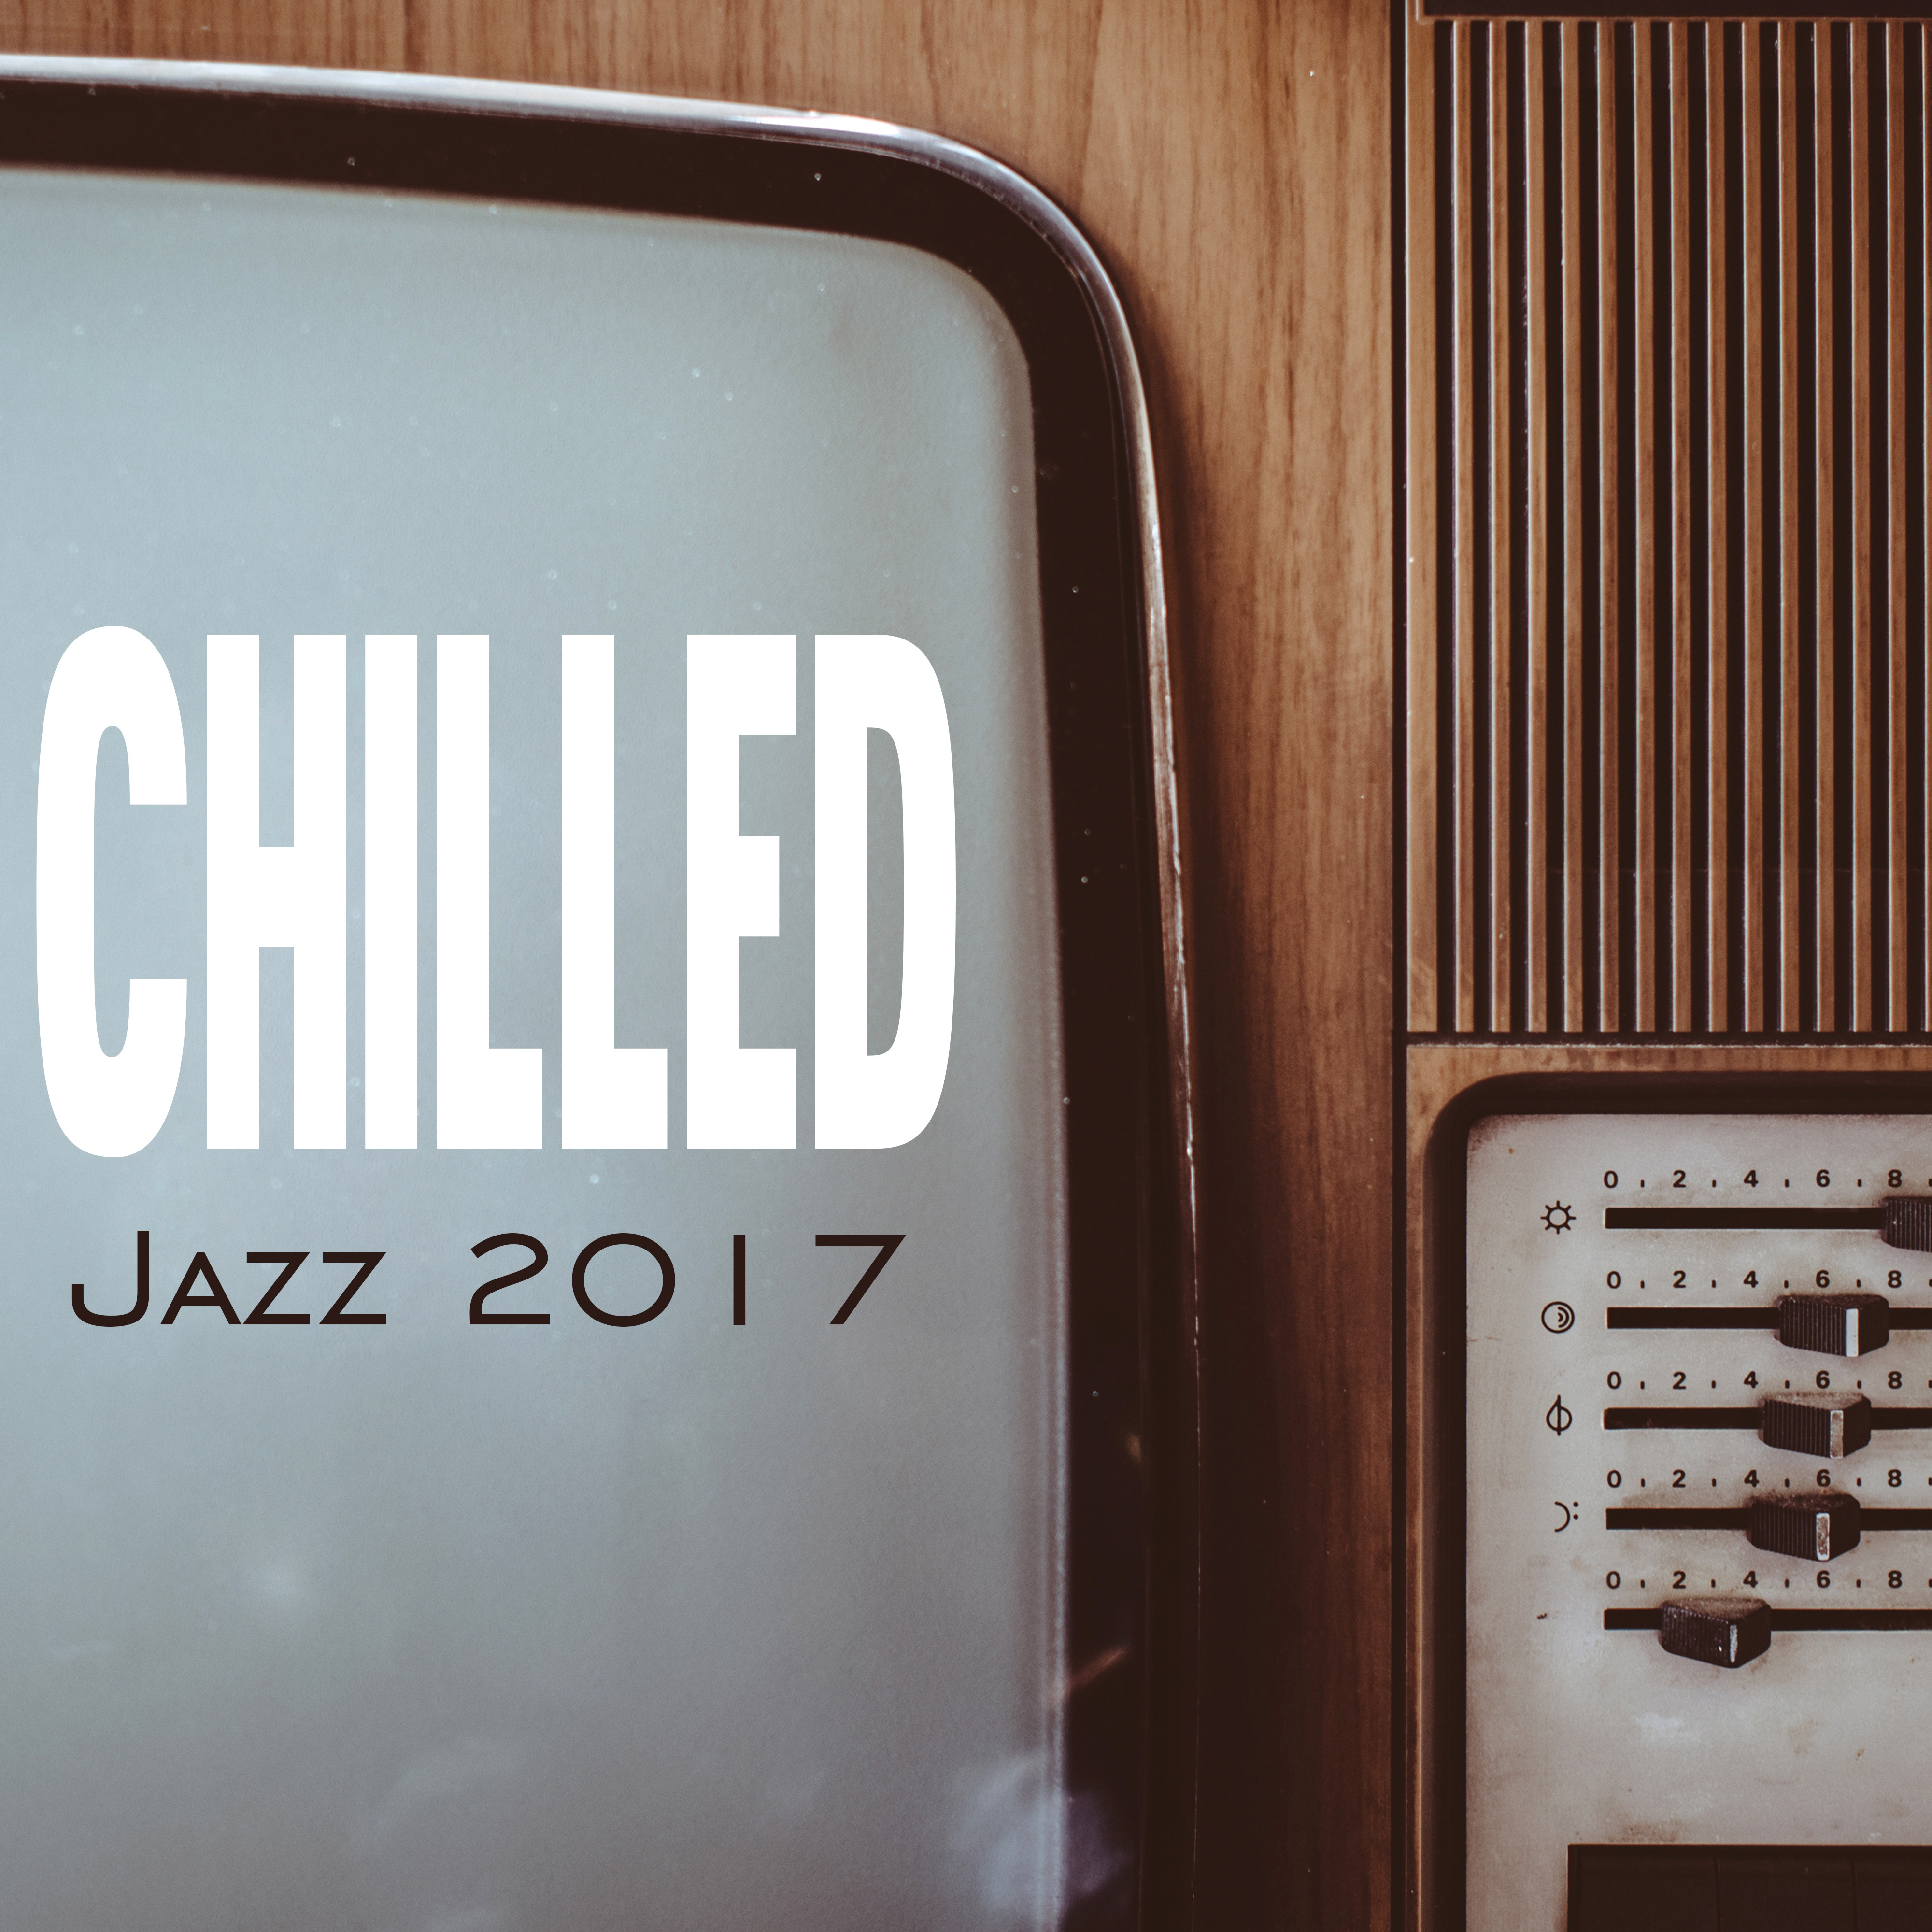 Chilled Jazz 2017  Soothing Jazz Compilation, Autumn Vibes, Jazz Session, Ambient Relaxation